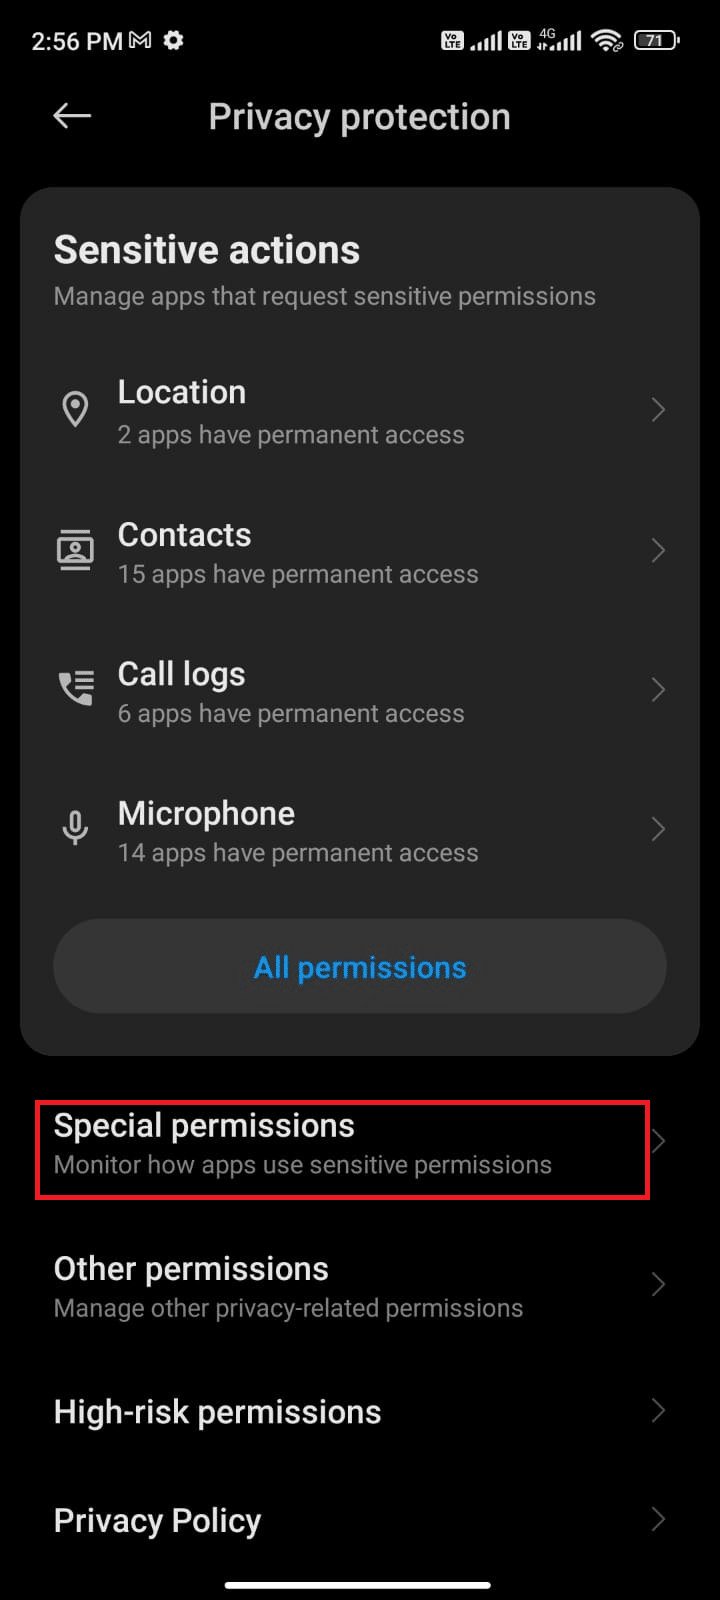 tap Special permissions